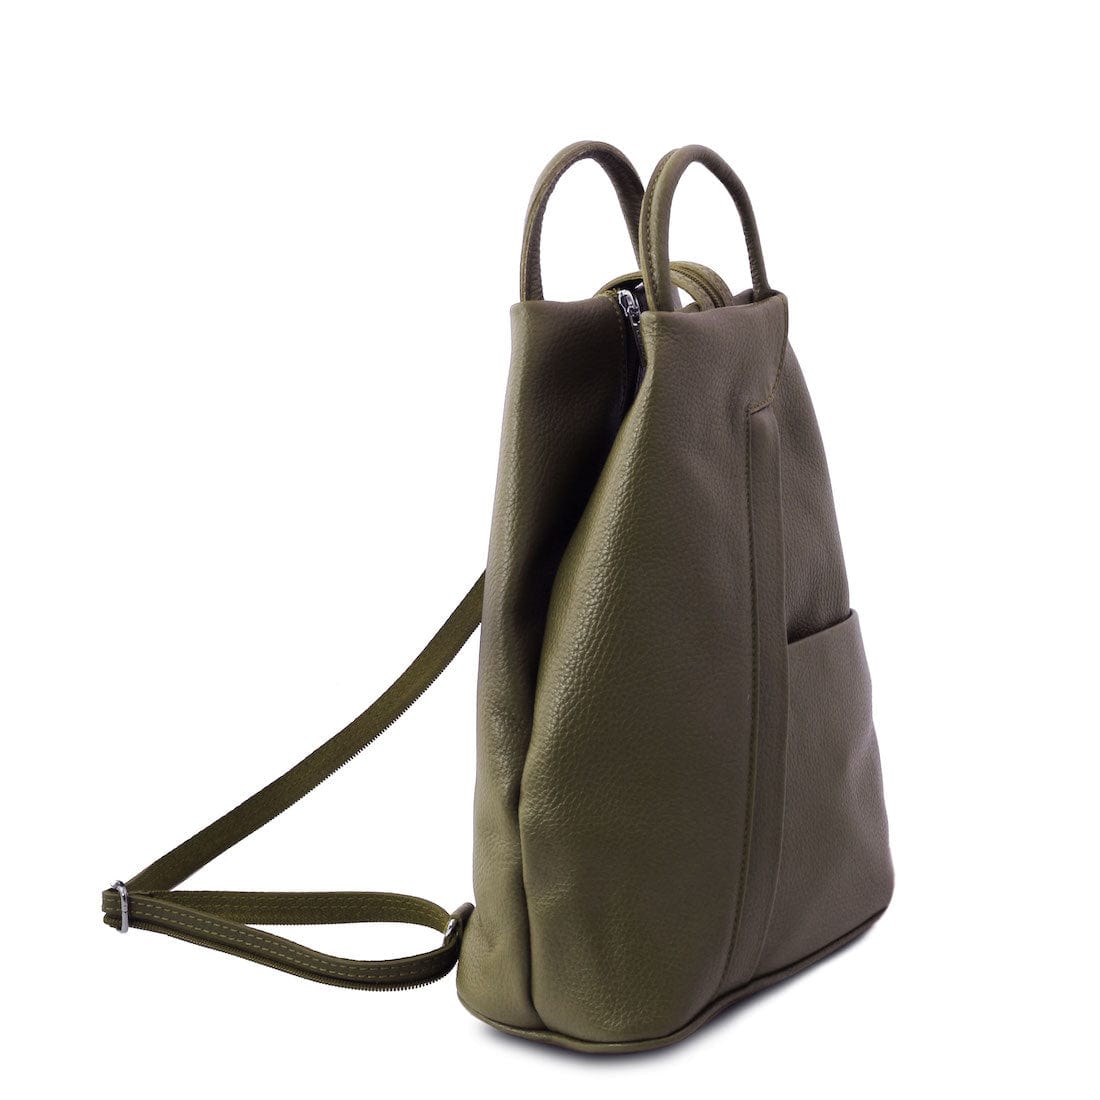 Shanghai - Italian leather backpack | TL141881 - Premium Leather Backpacks - Shop now at San Rocco Italia